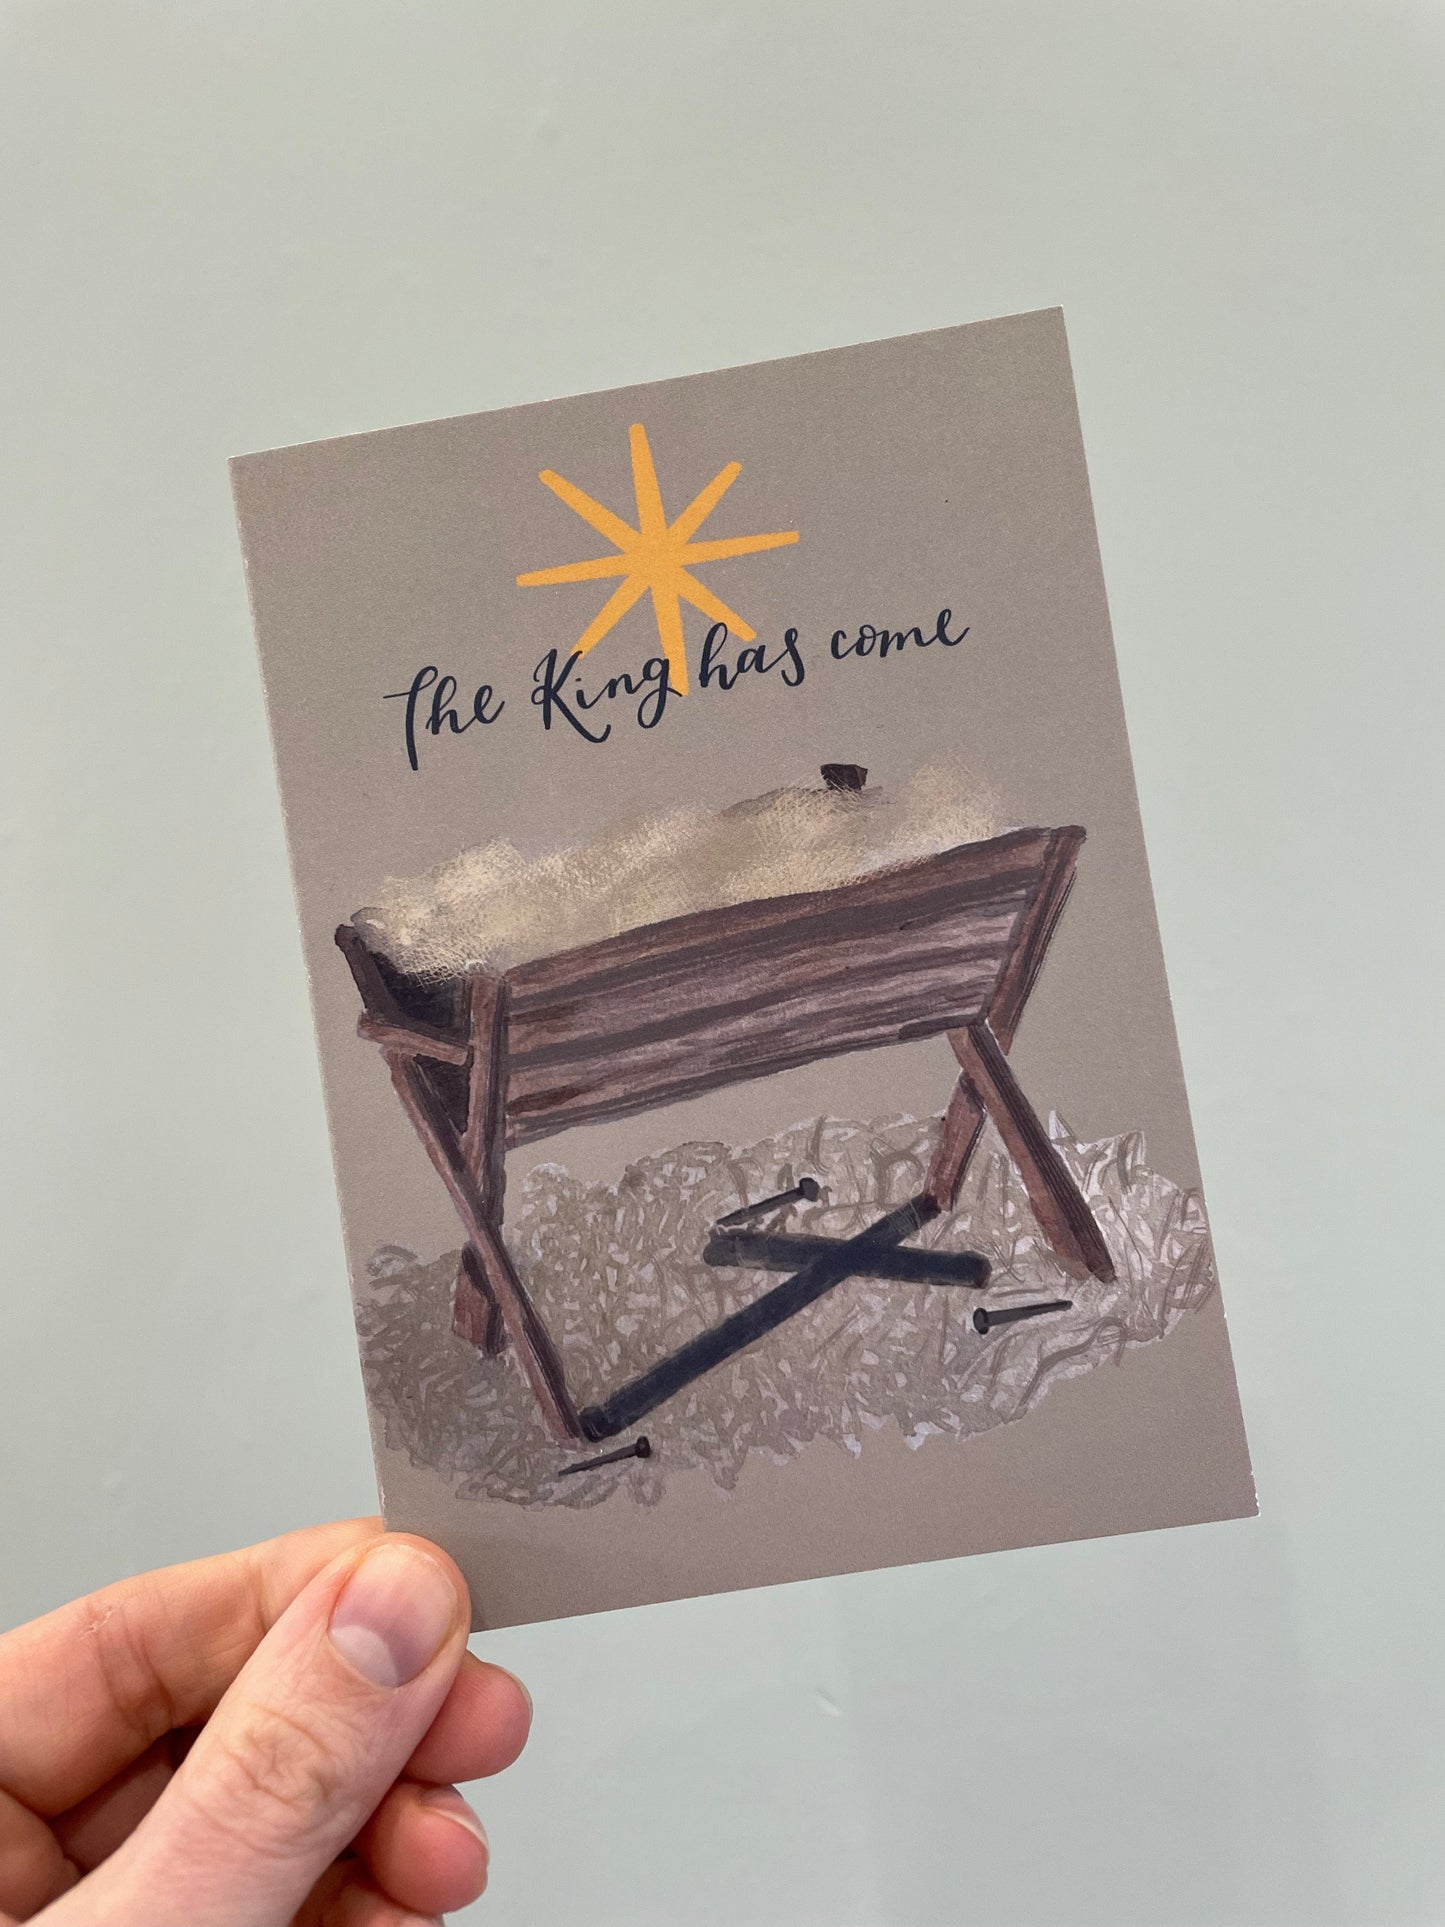 And Hope Designs SECONDS - pack of the King has come Christmas cards